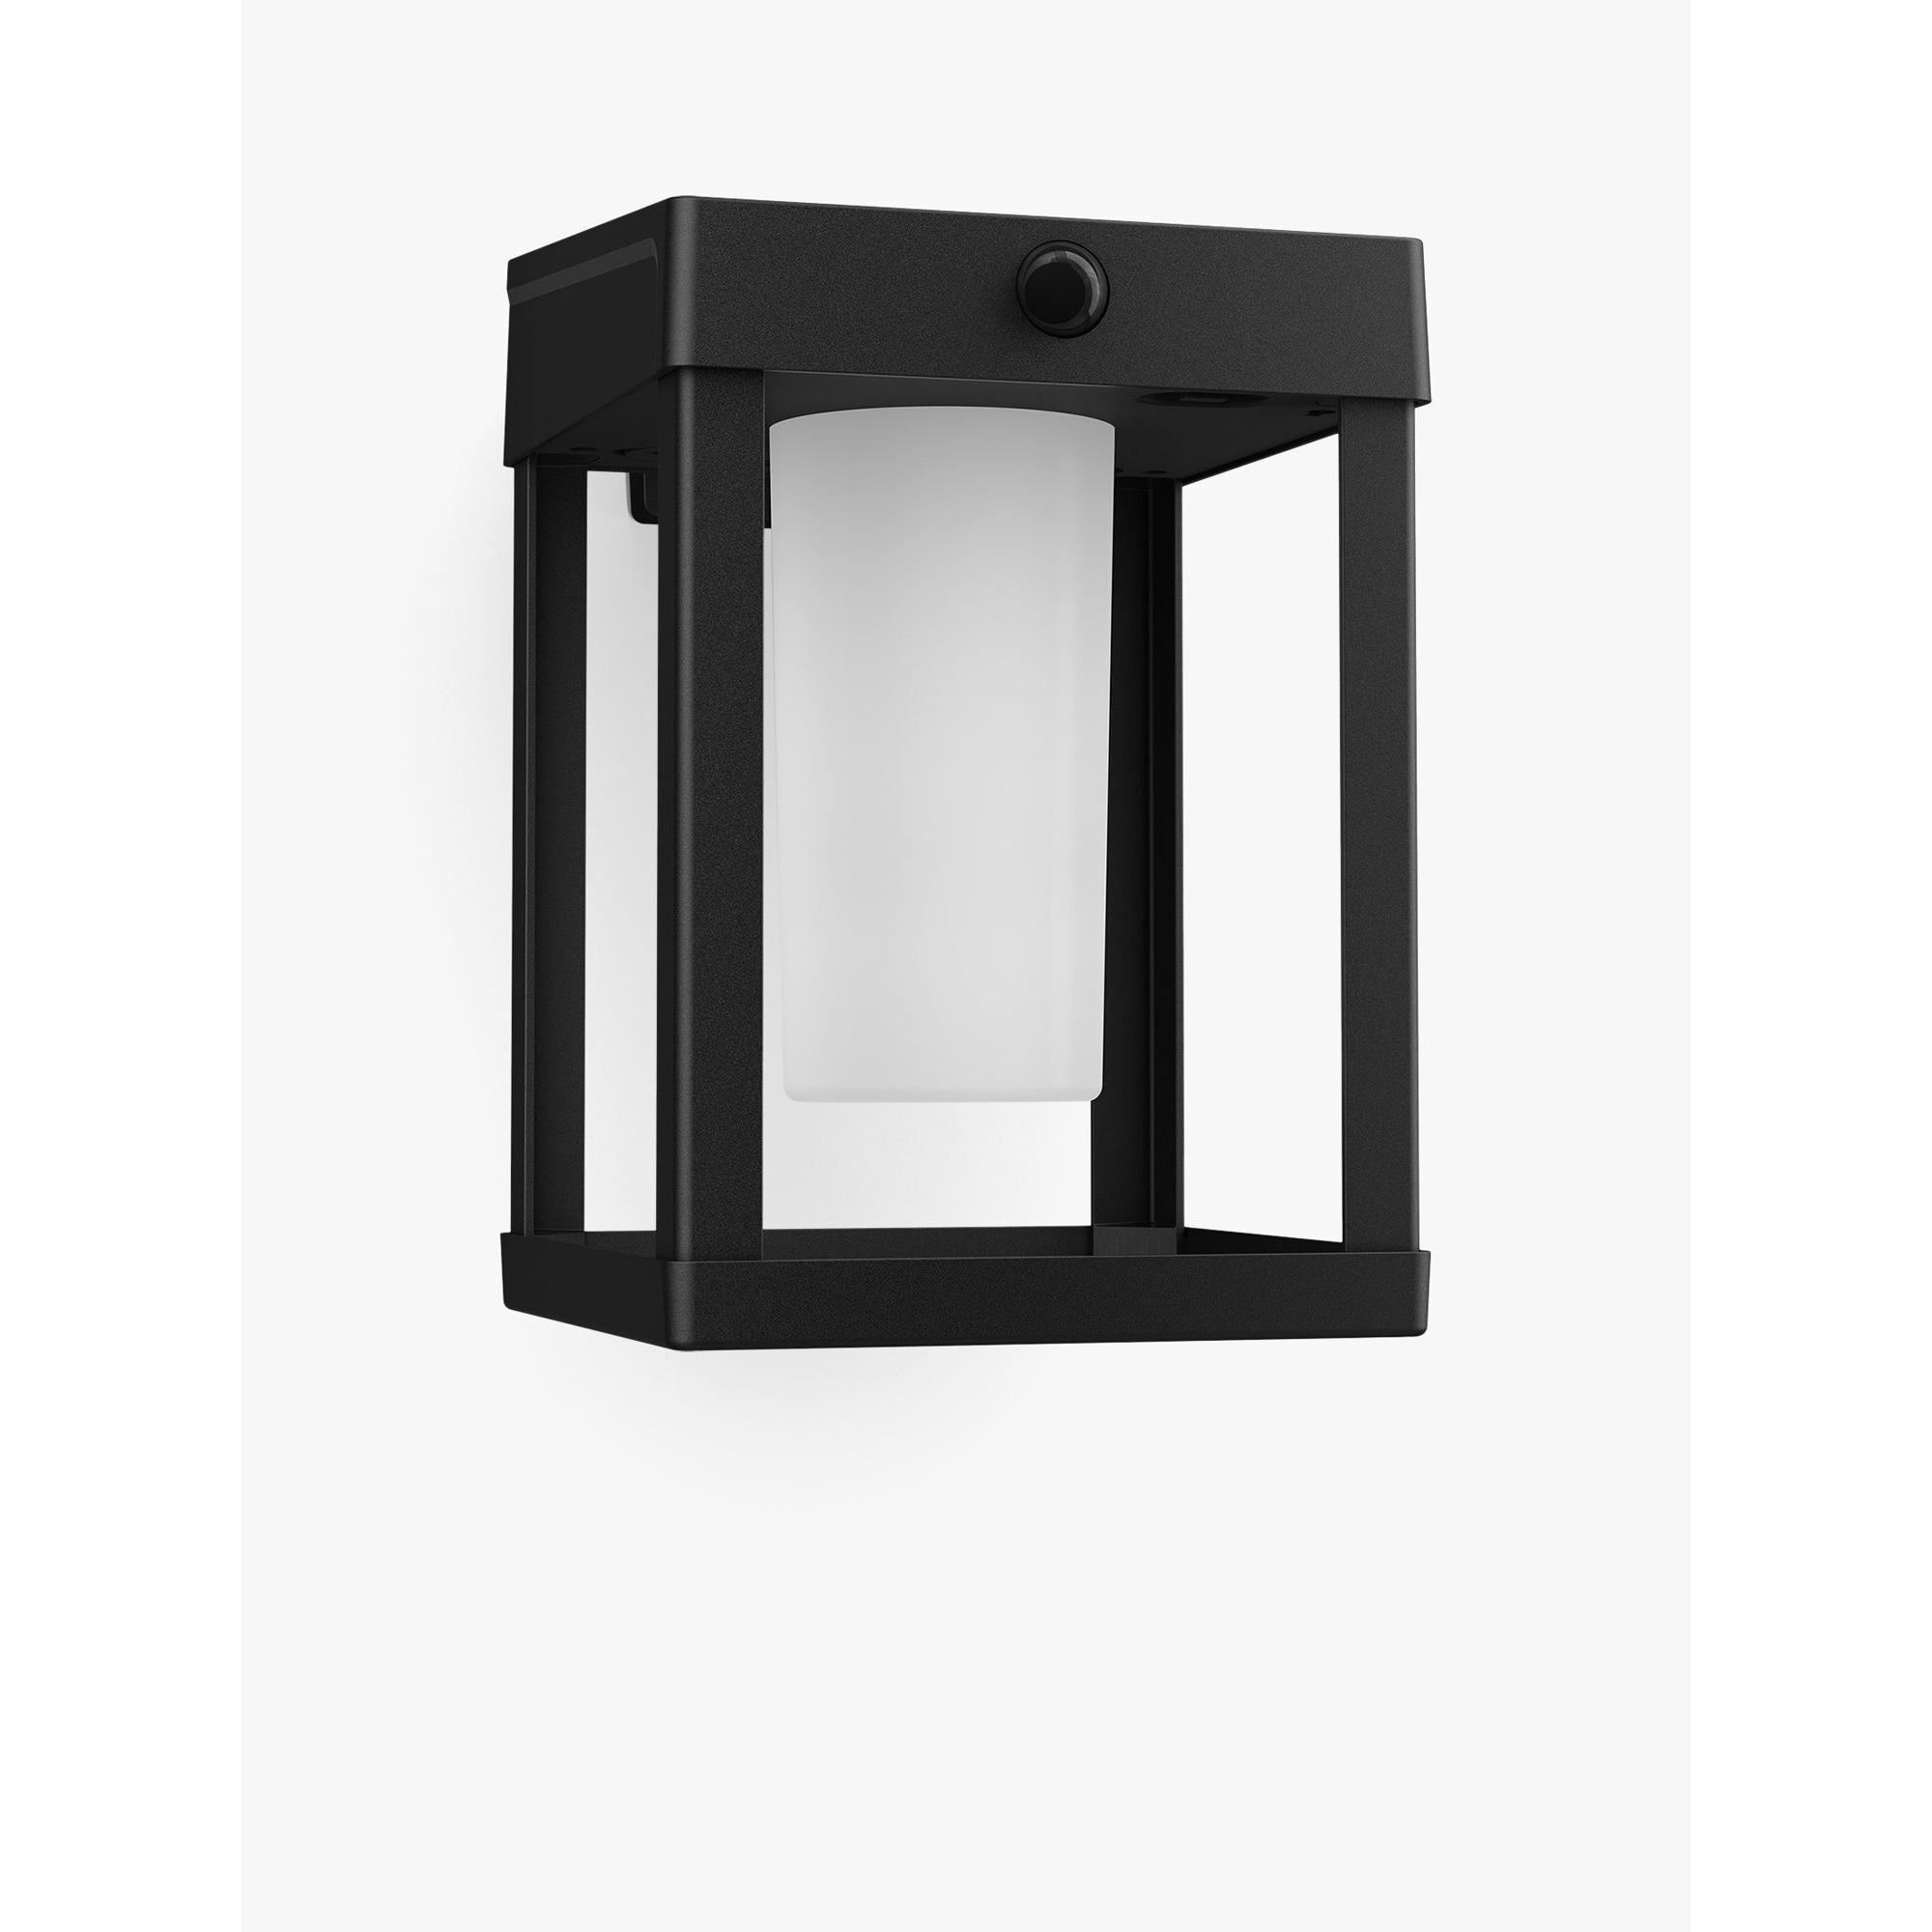 Philips Camill Solar Powered Outdoor Wall Light, Black - image 1